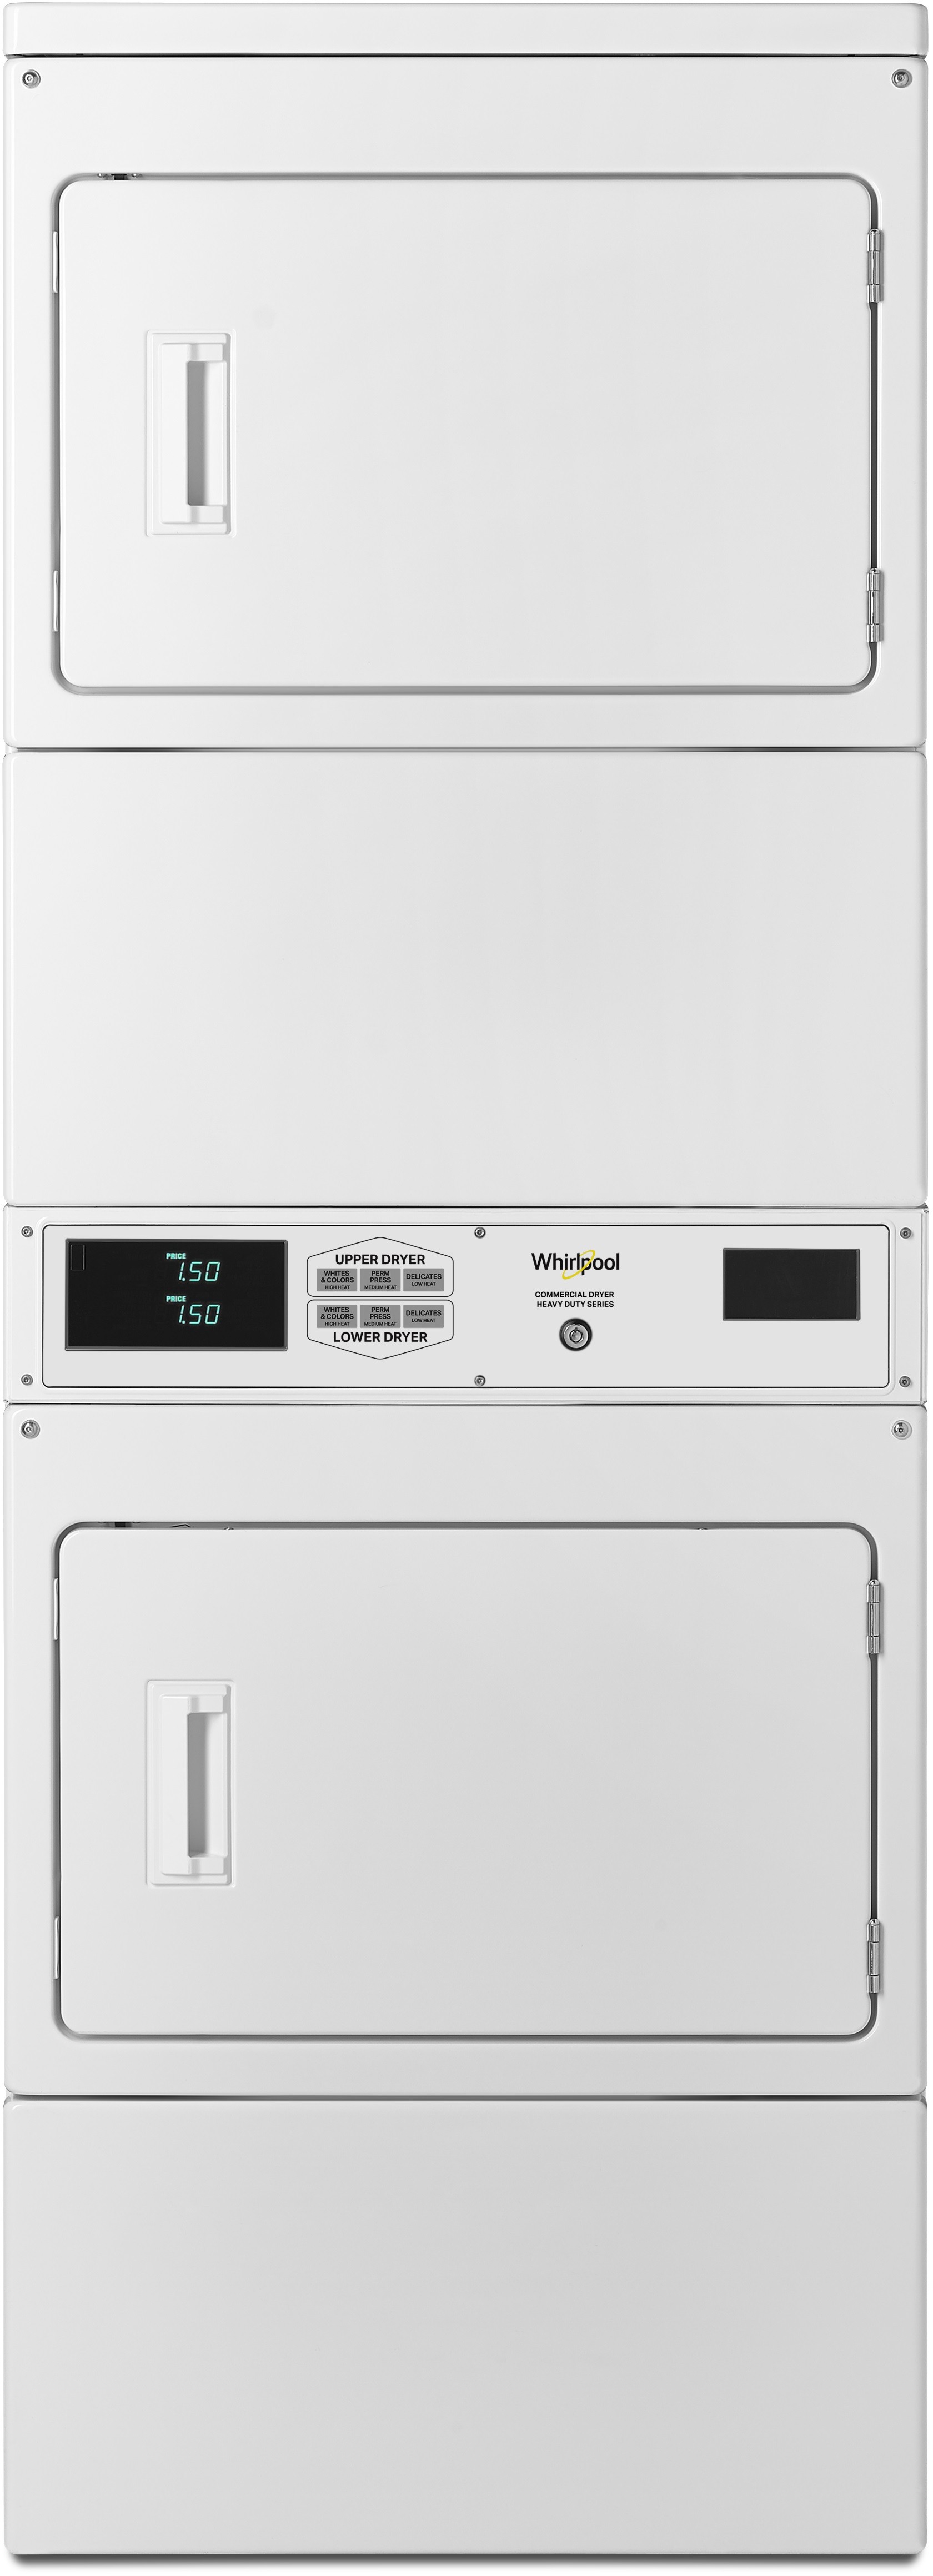 Commercial Laundry 27"" ElectricLaundry Center - Whirlpool CSP2970HQ